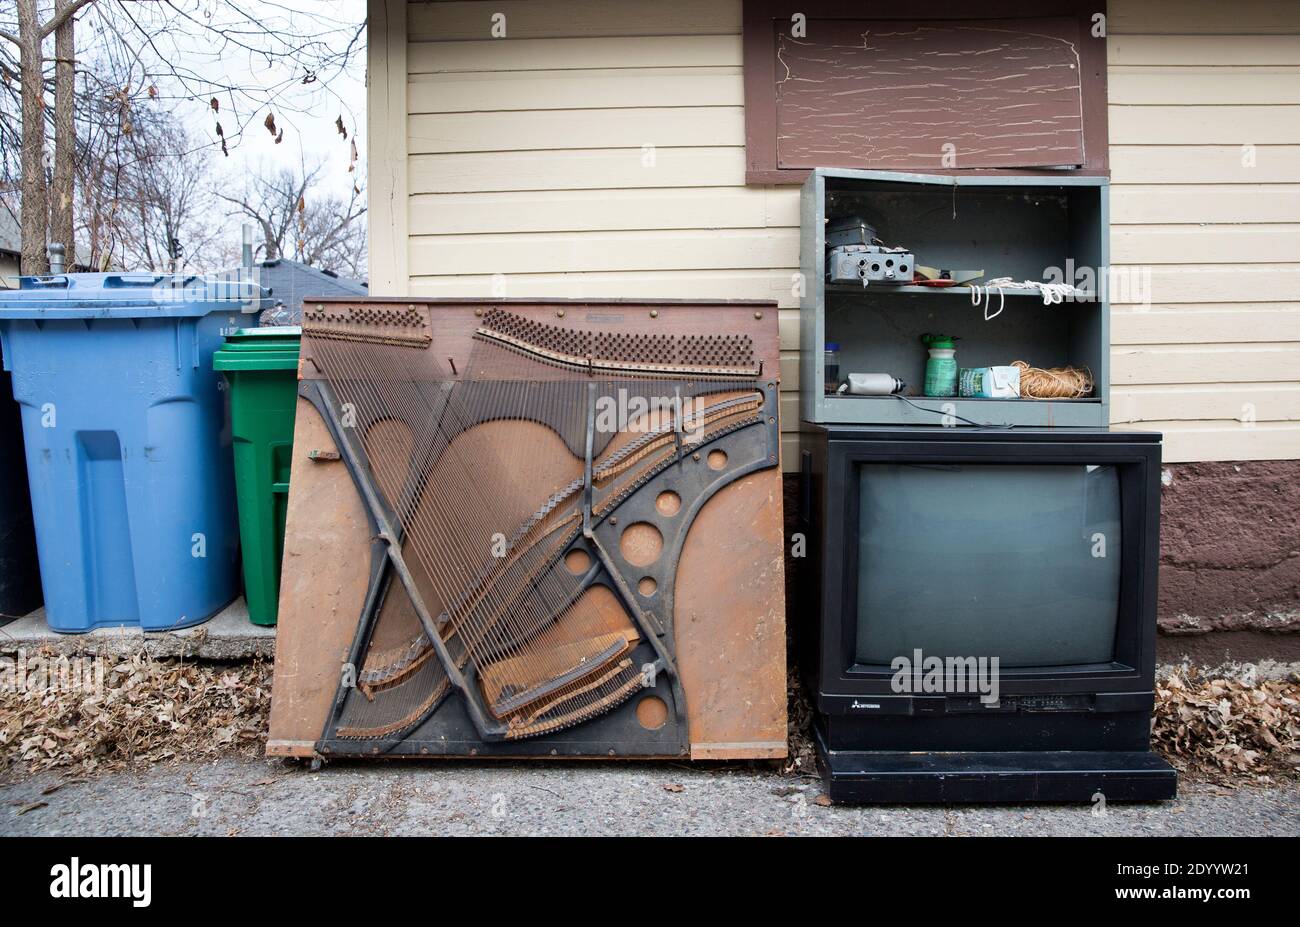 An old upright piano soundboard, electronics, and a television in the alley awaiting garbage, solid waste removal, and recycling. Stock Photo